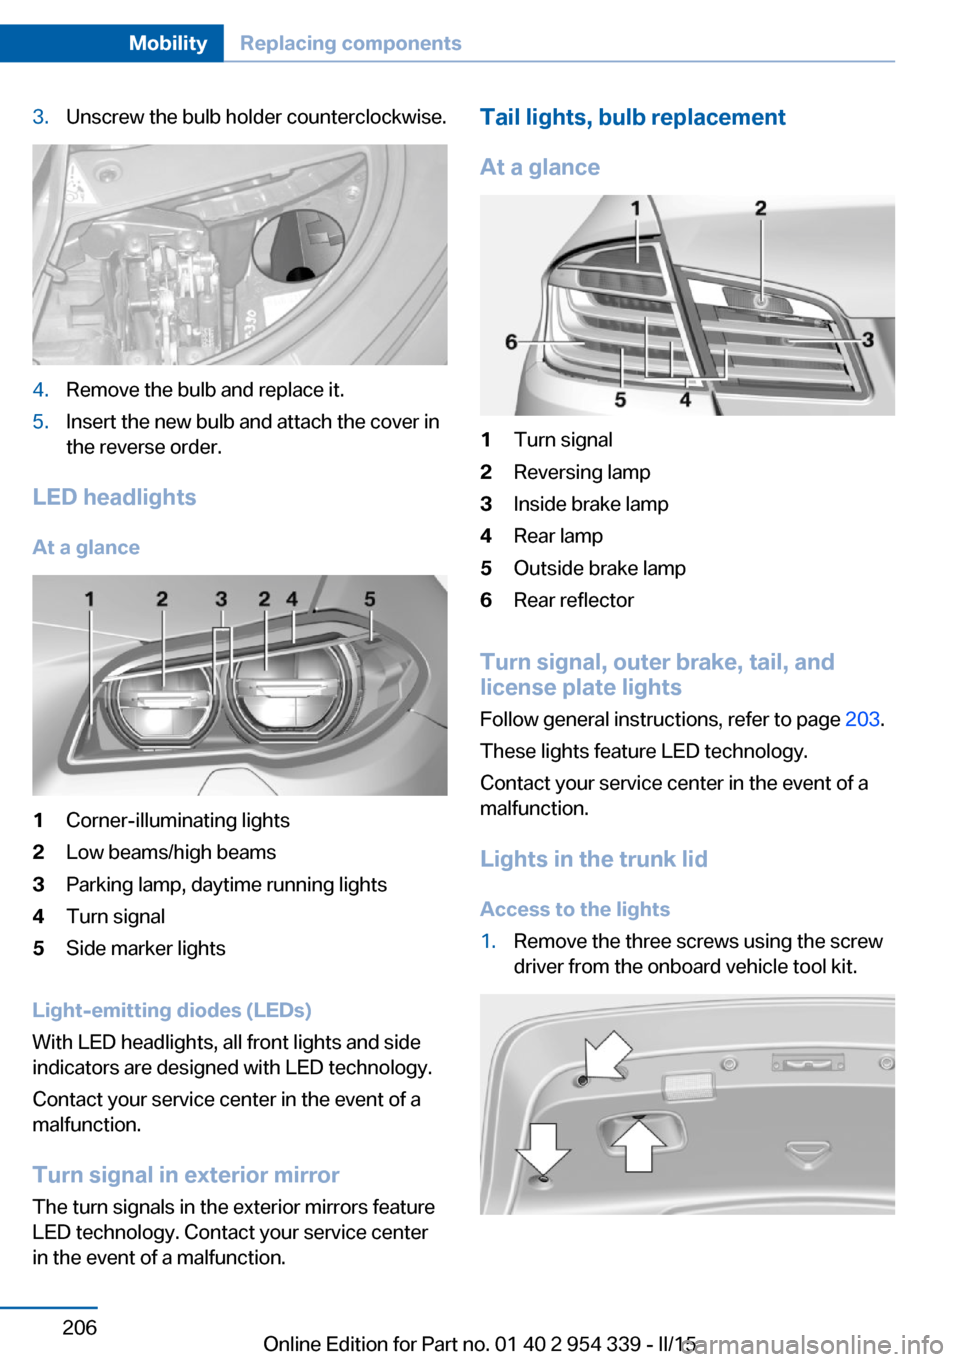 BMW M5 2016 F10M Owners Manual 3.Unscrew the bulb holder counterclockwise.4.Remove the bulb and replace it.5.Insert the new bulb and attach the cover in
the reverse order.
LED headlights
At a glance
1Corner-illuminating lights2Low 